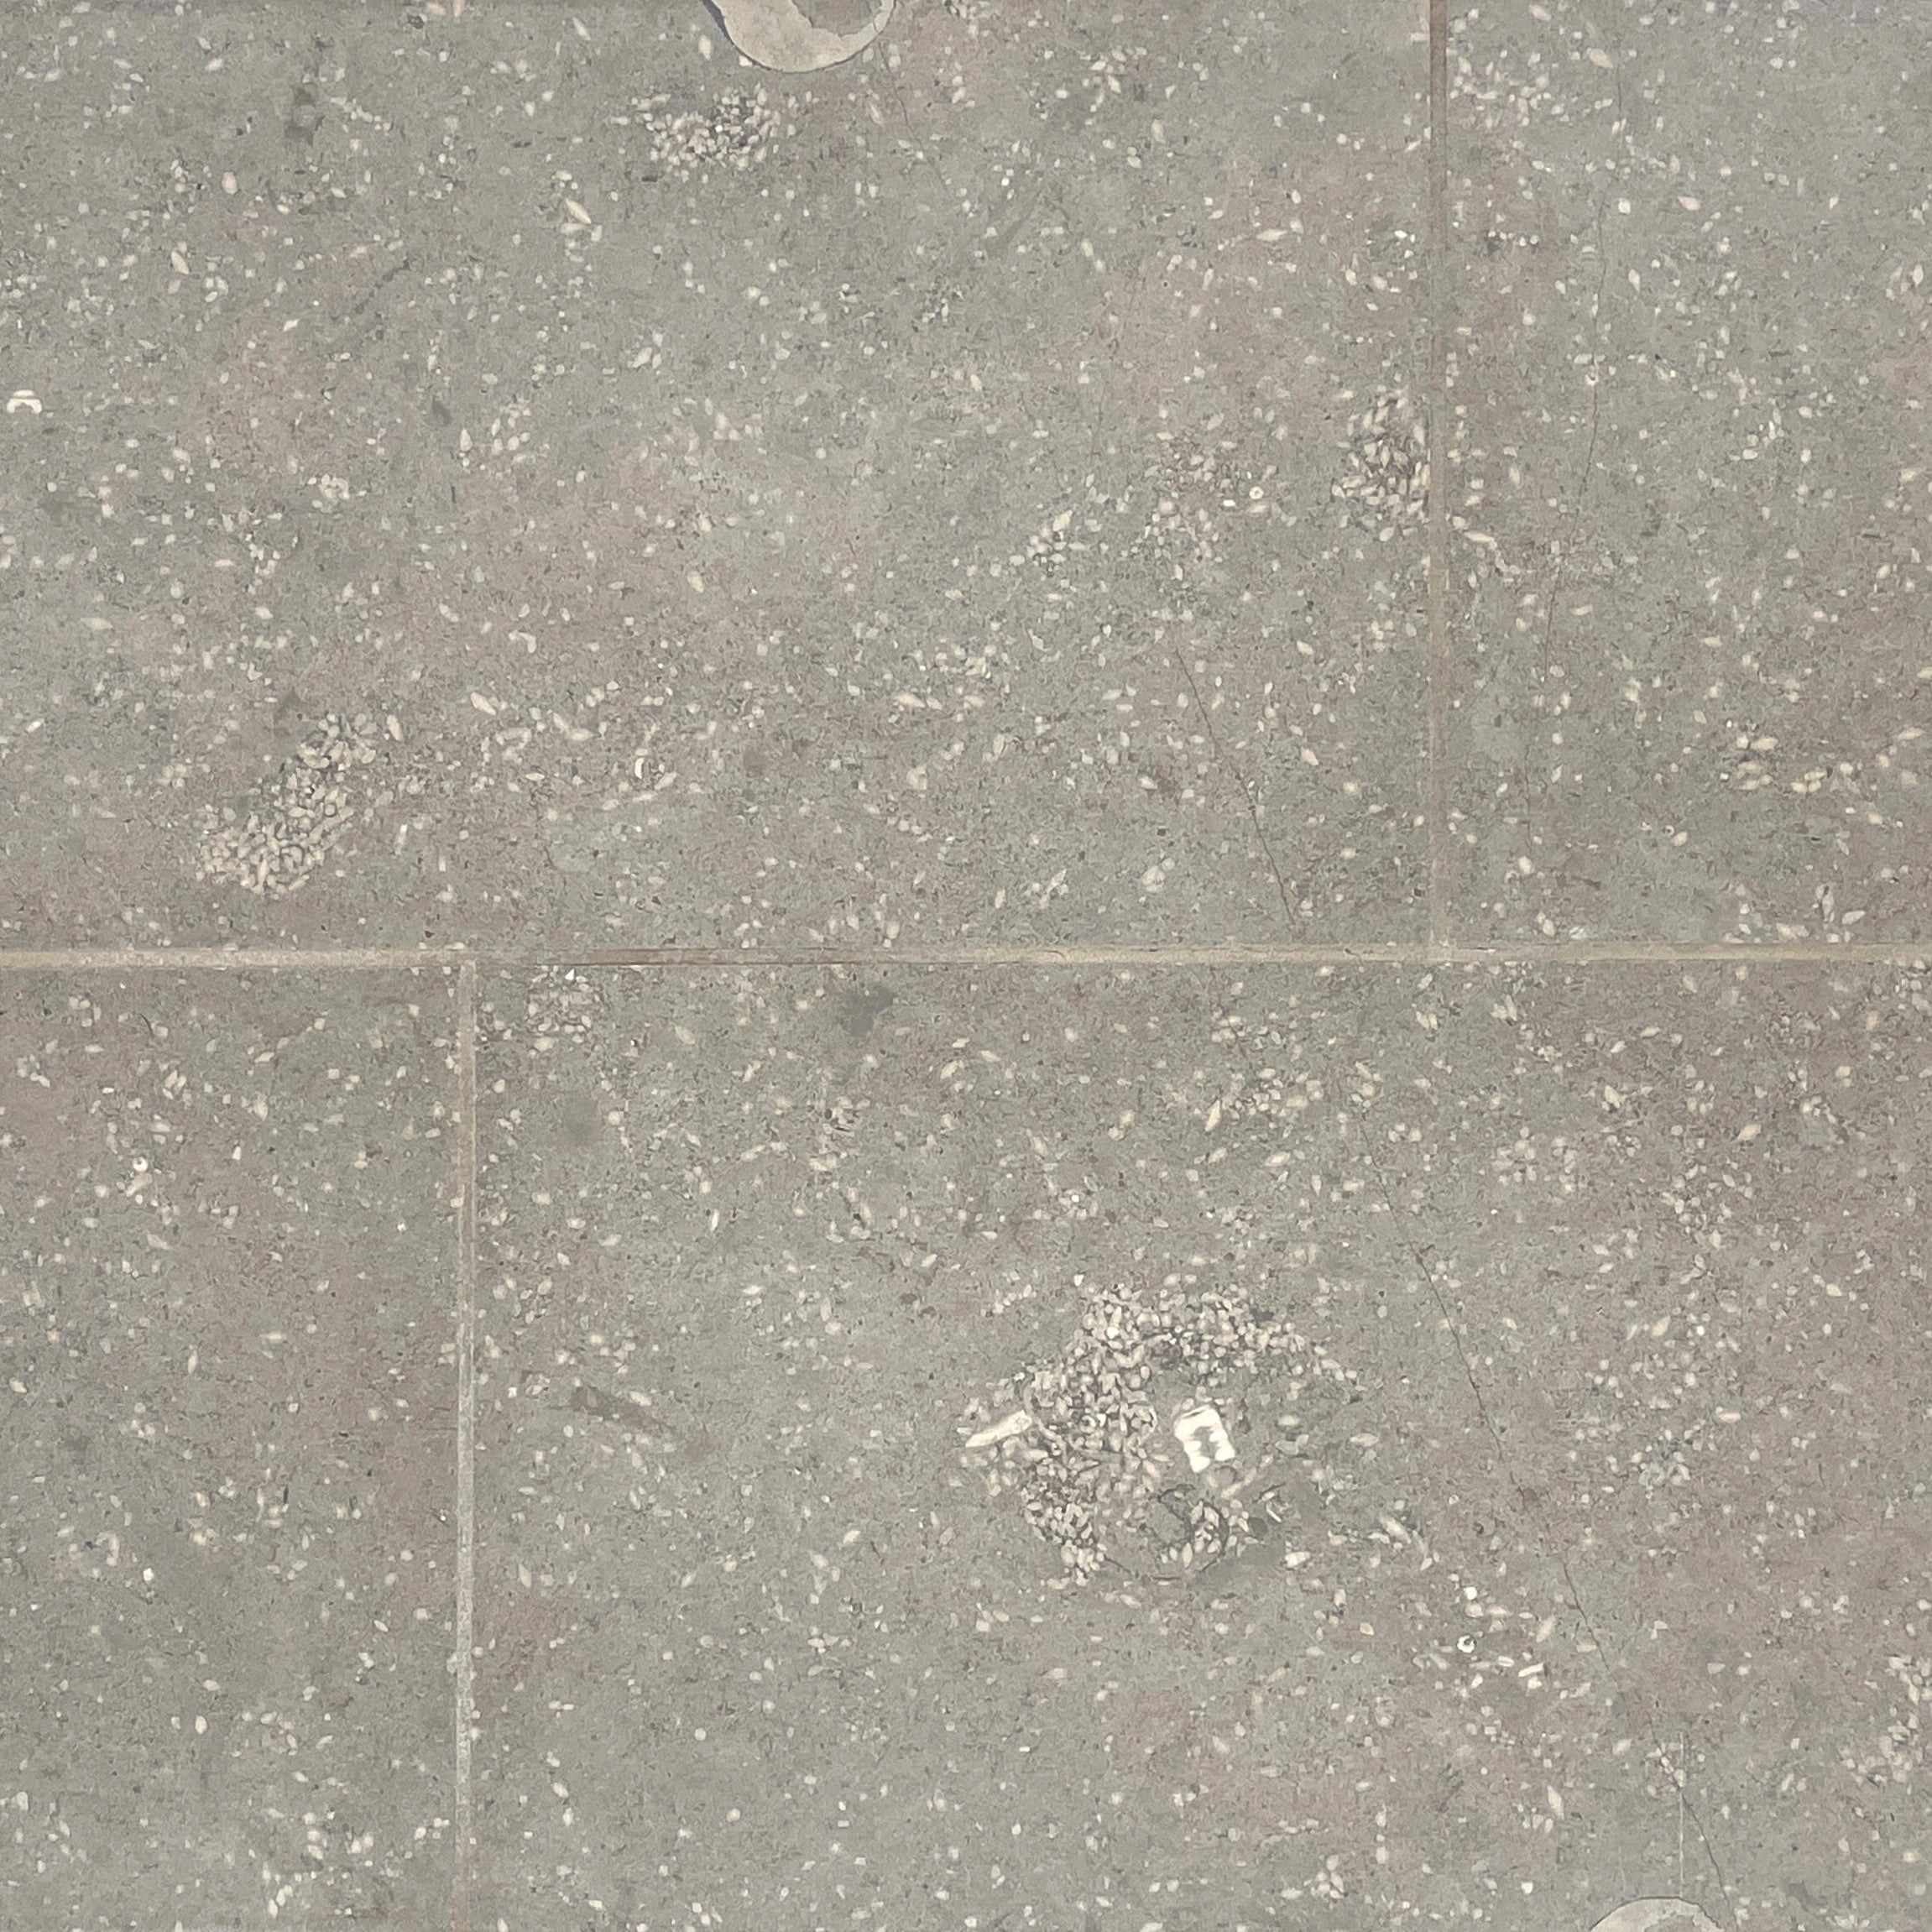 fossil star grey limestone gray stone tile  sold by surface group